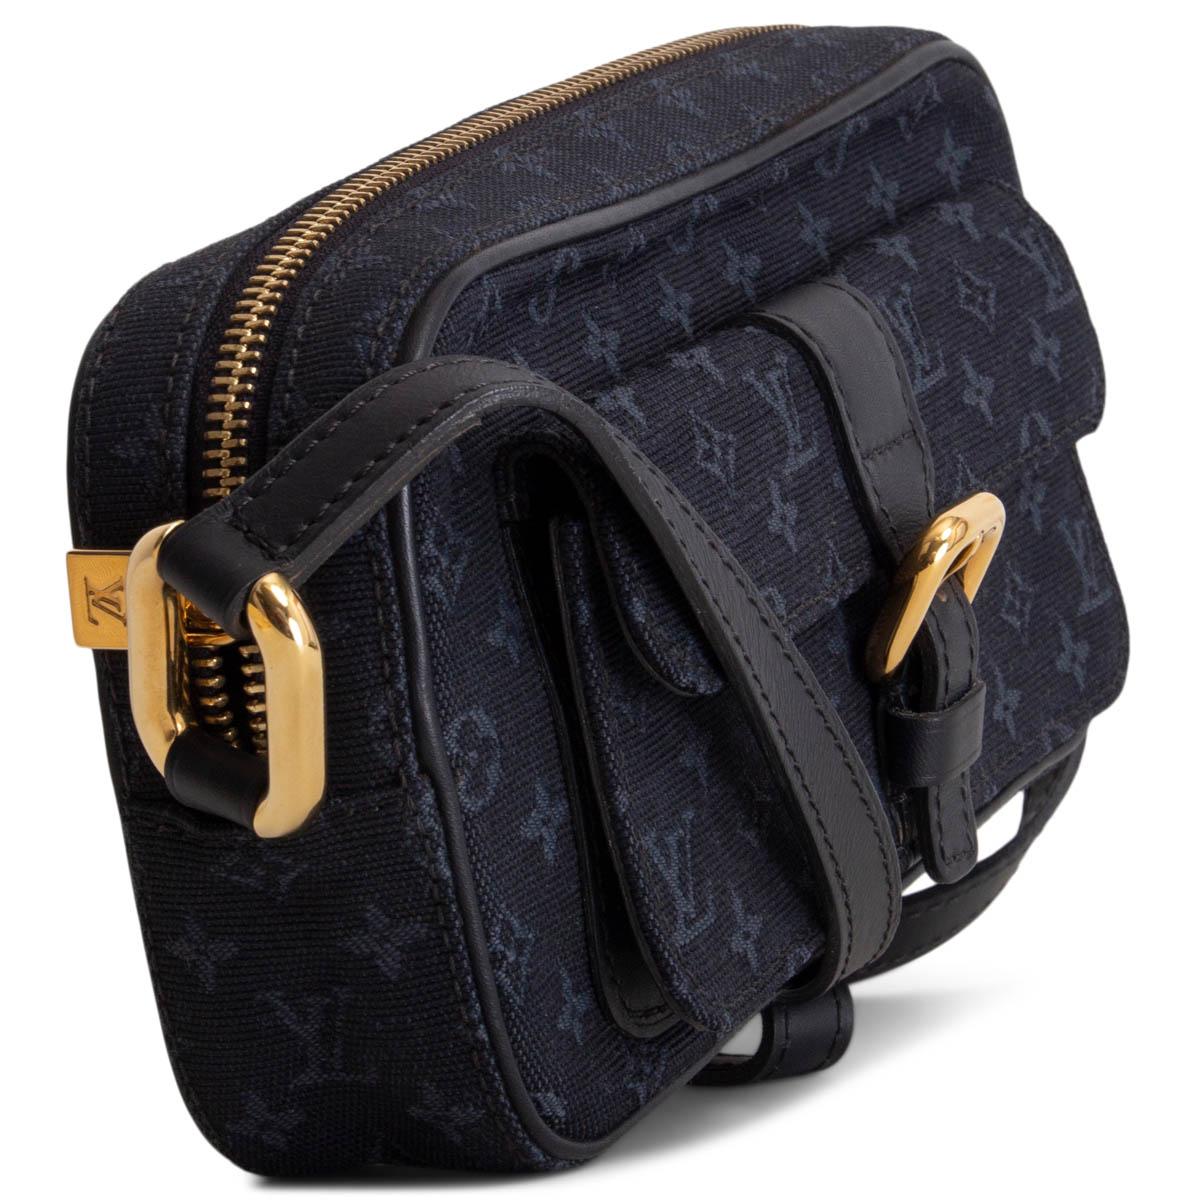 100% authentic Louis Vuitton Juliette MM Crossbody Bag Monogram Mini Lin in navy blue canvas featuring gold-tone hardware. It comes with a front pocket and an adjustable long shoulder strap that can be worn on the shoulder or cross-body. Opens with